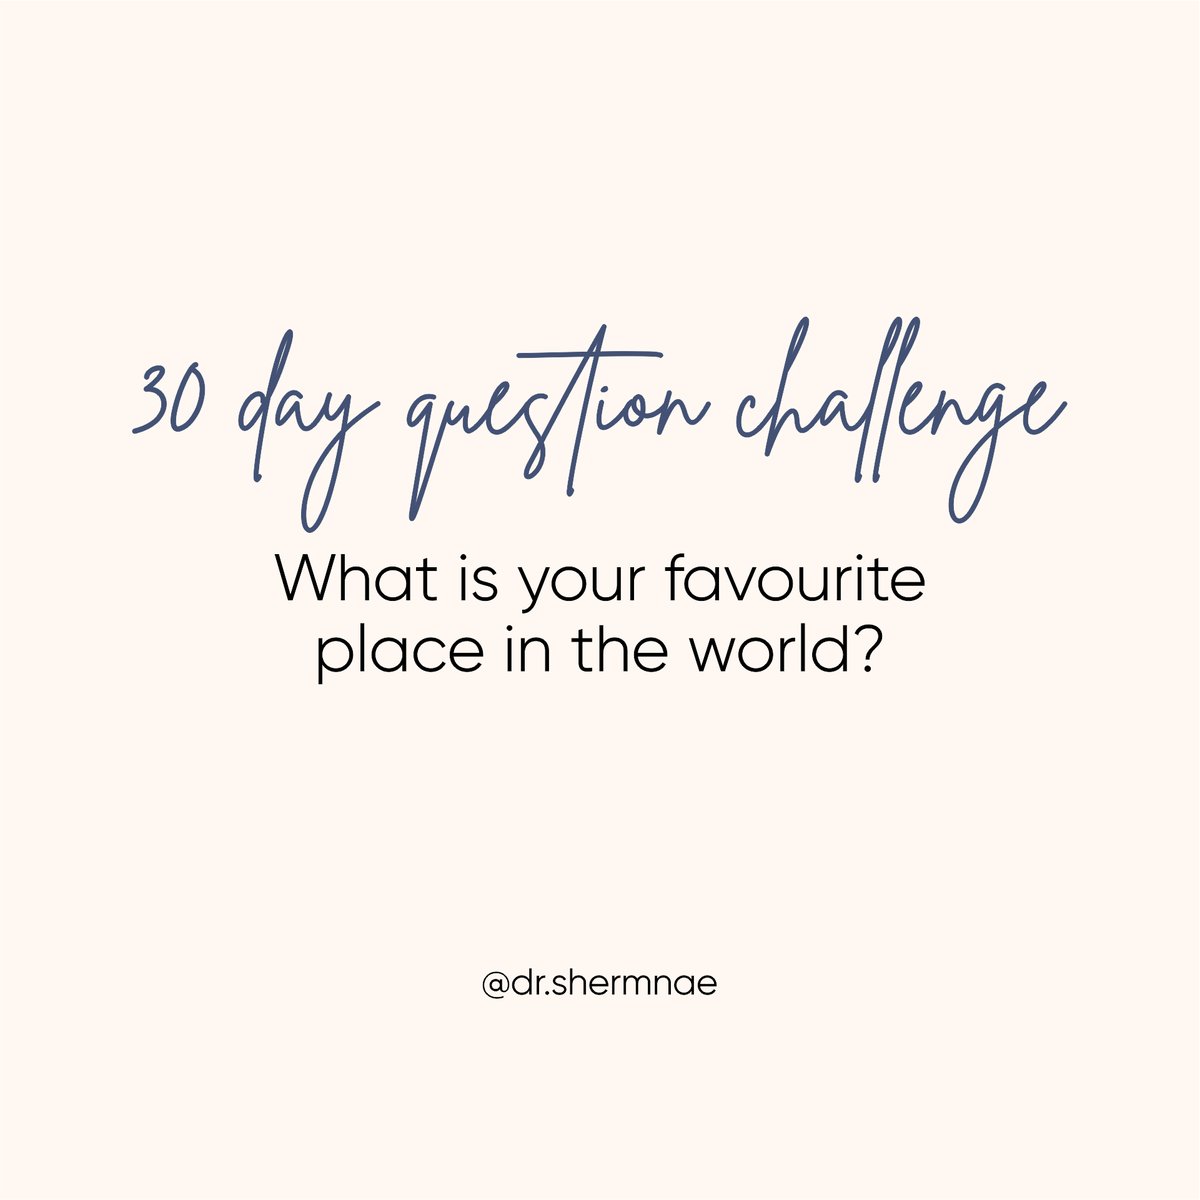 Day 14/30 - Share in the comments👇 👇

#drshermnae #personalcoach #success #business #inspiration #selflove #alignment #transformation #meditation #empaths #selfempowerment #vulnerability #intuition #higherself #intuitive #consciousness #abundance #confidence #motivationmonday